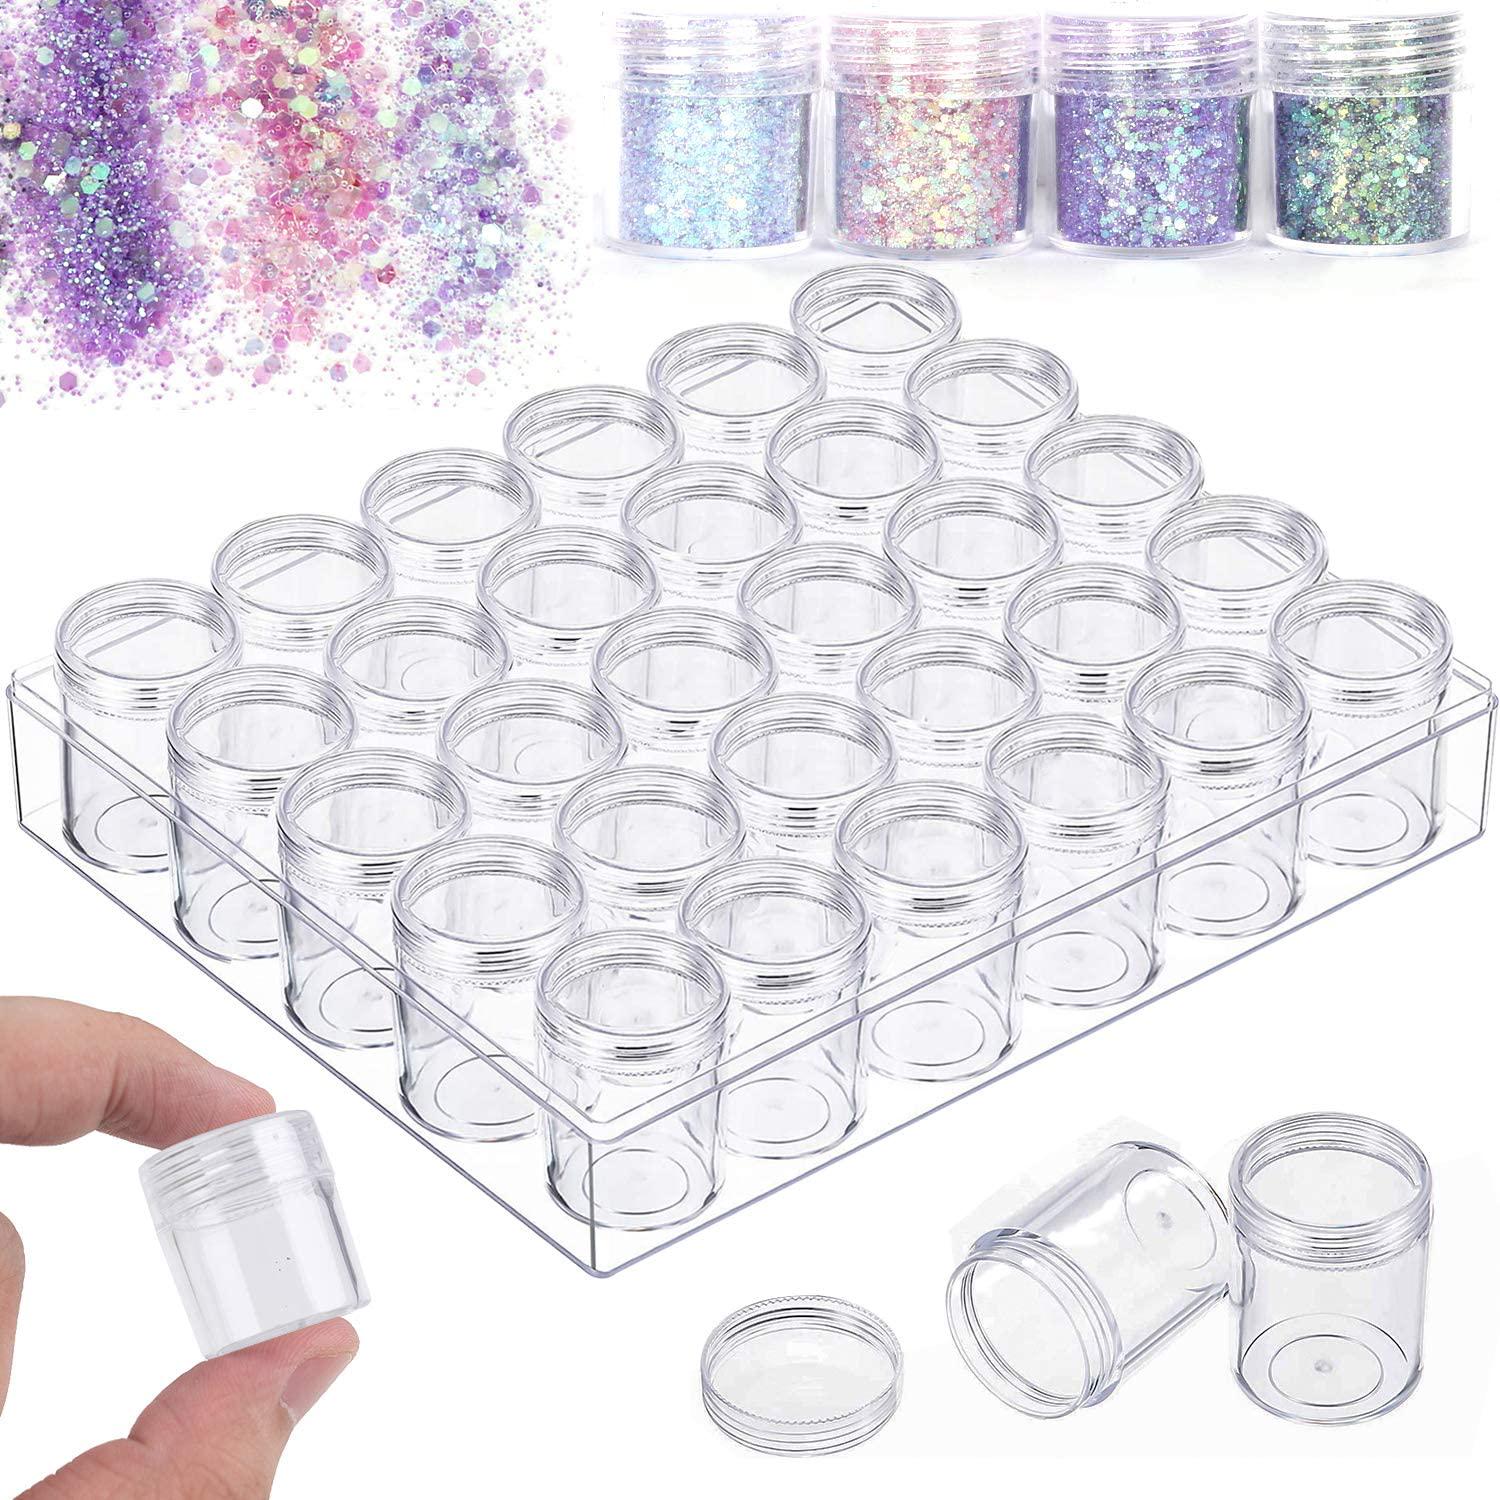 BigOtters, Embroidery Diamond Storage Box, 30PCS Small Clear Plastic Bead Containers with Lid for Jewelry Painting DIY Art Craft Rhinestones Sewing Cosmetic Nail Glitter Powder